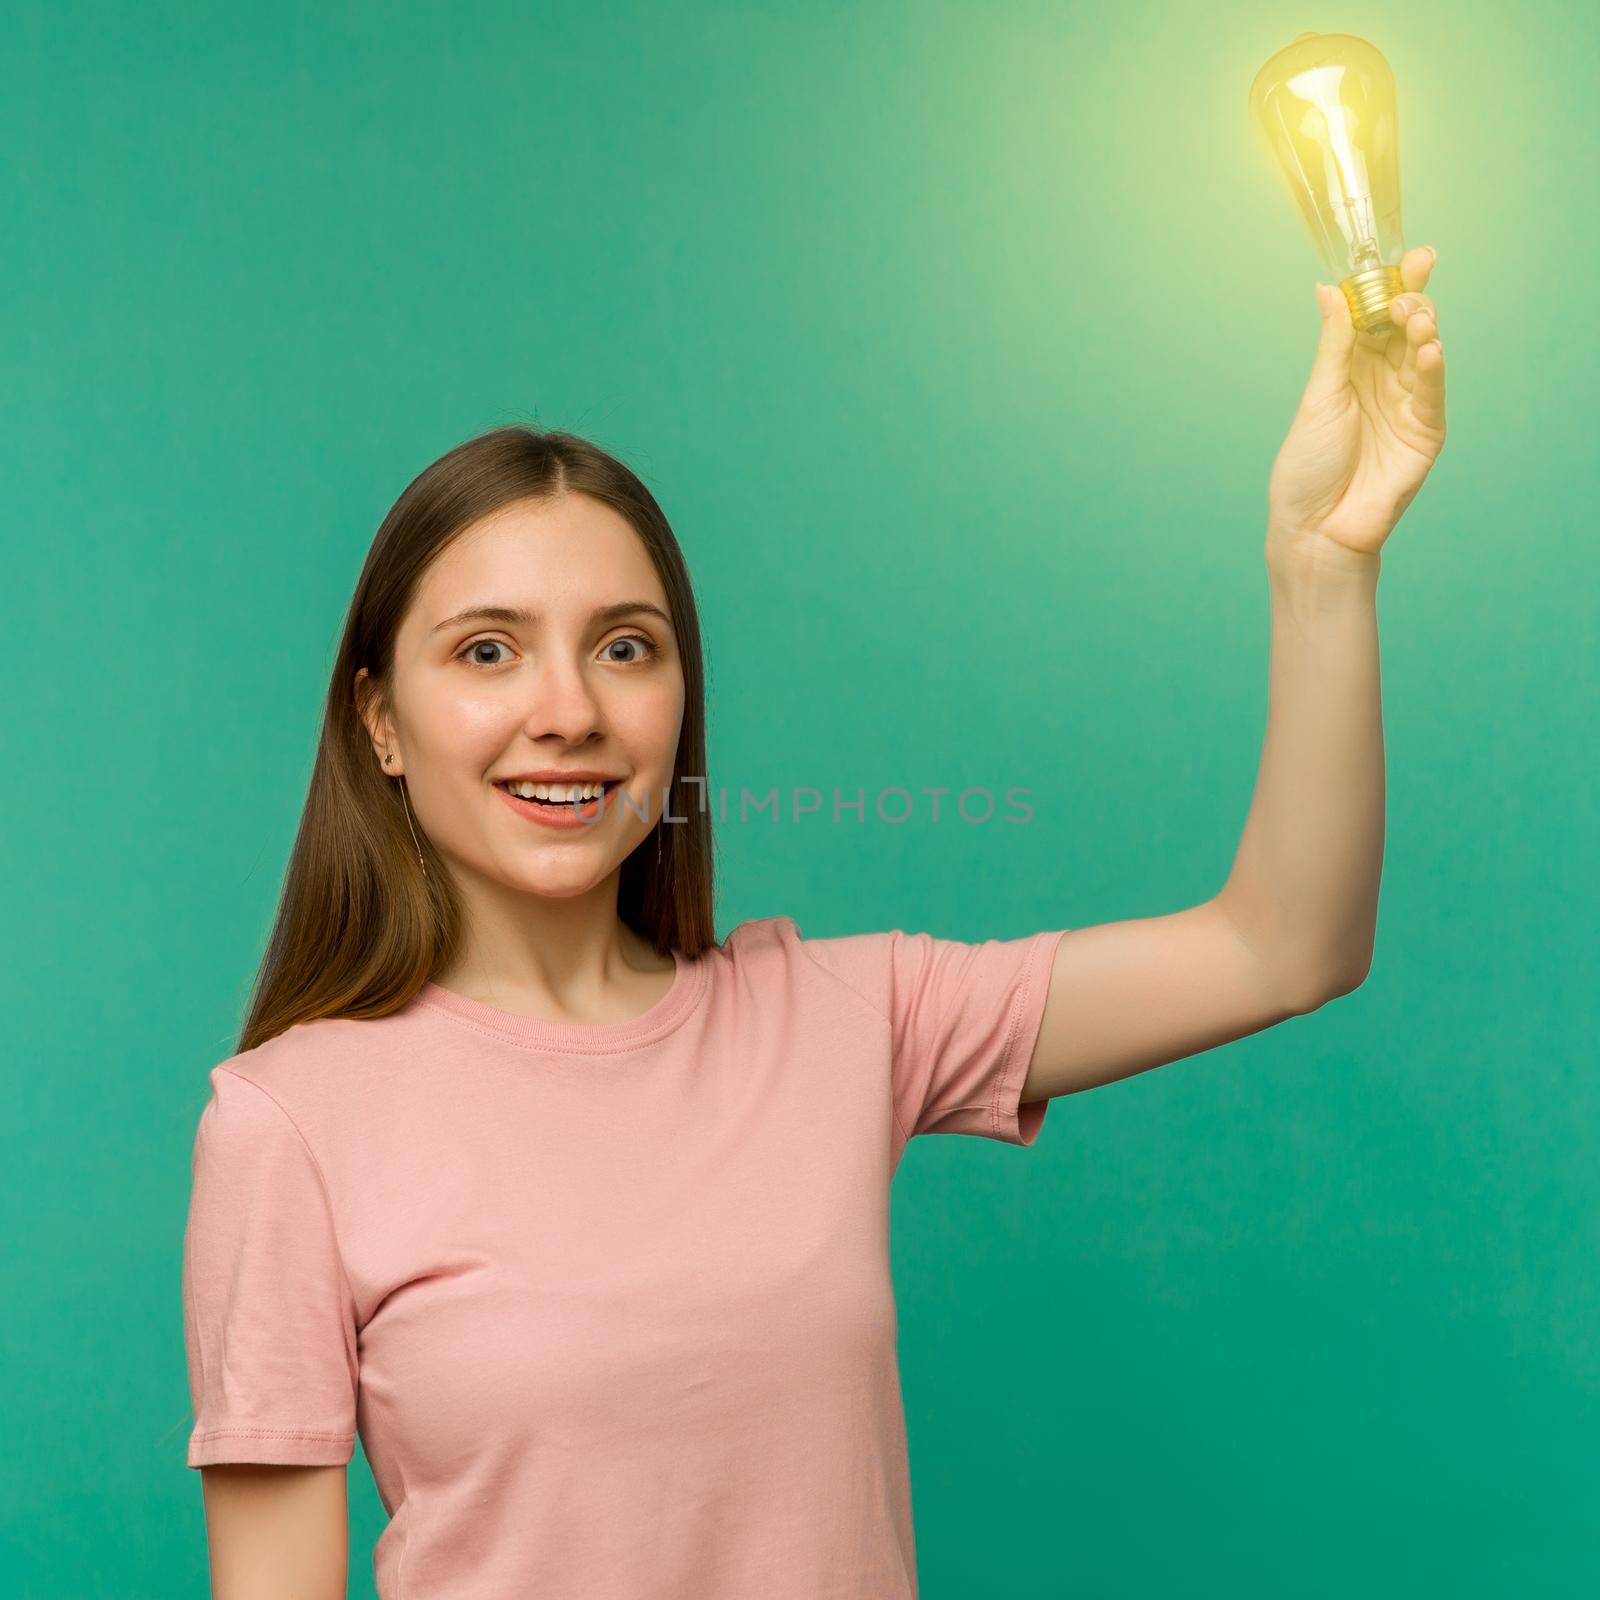 Cute girl student holds a lamp in her hand isolated on a background. The concept of an idea or creative insight.